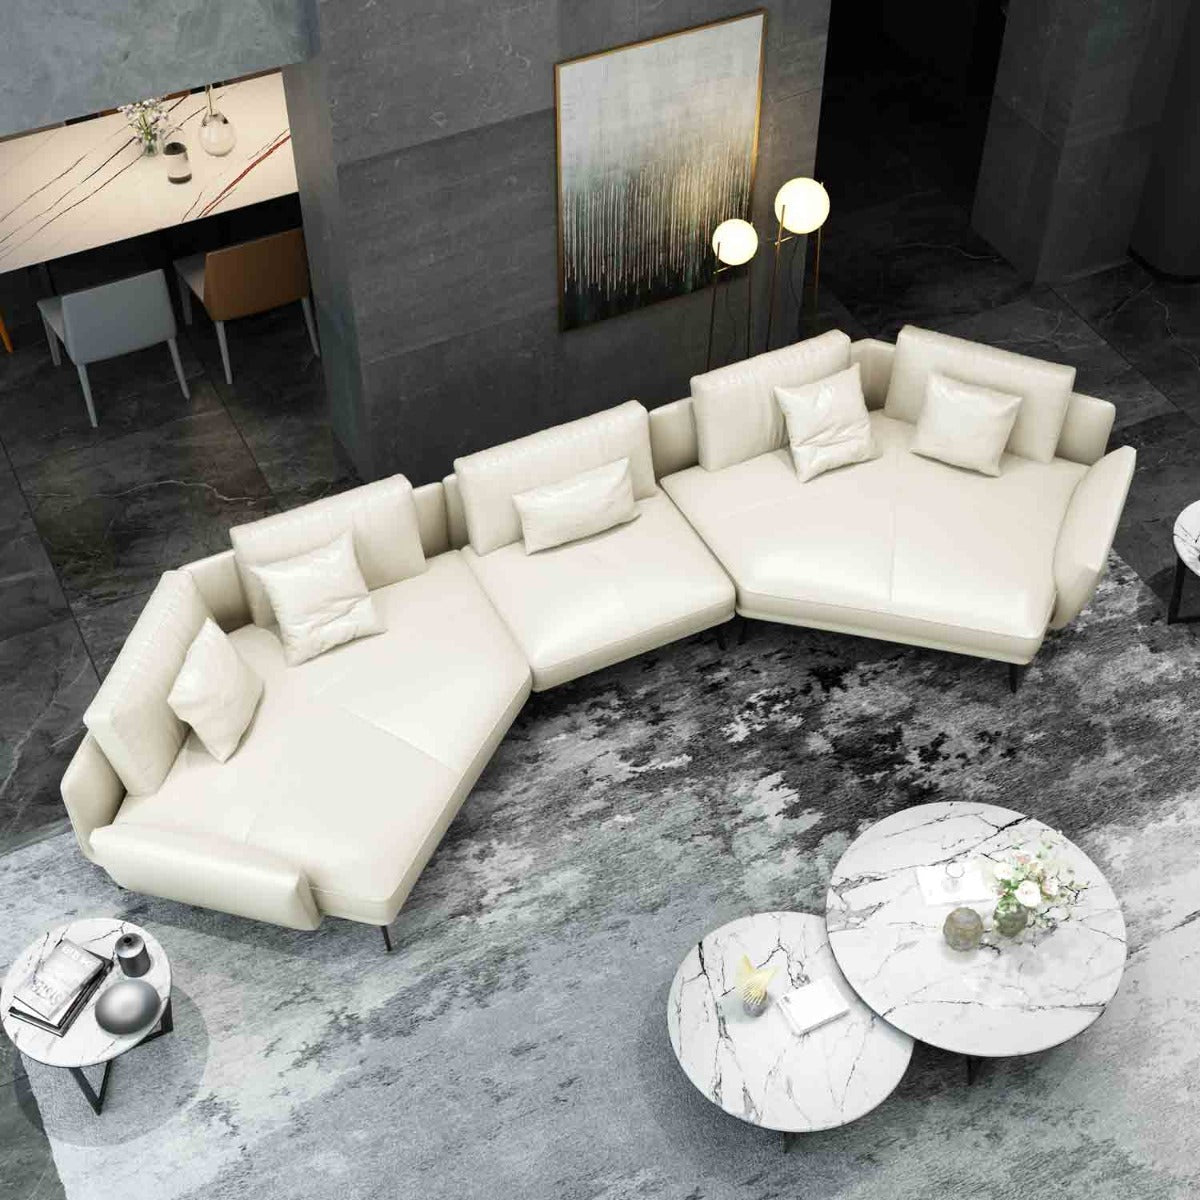 European Furniture - Venere 5 Seater Sectional in Off White - 65556-5S - New Star Living